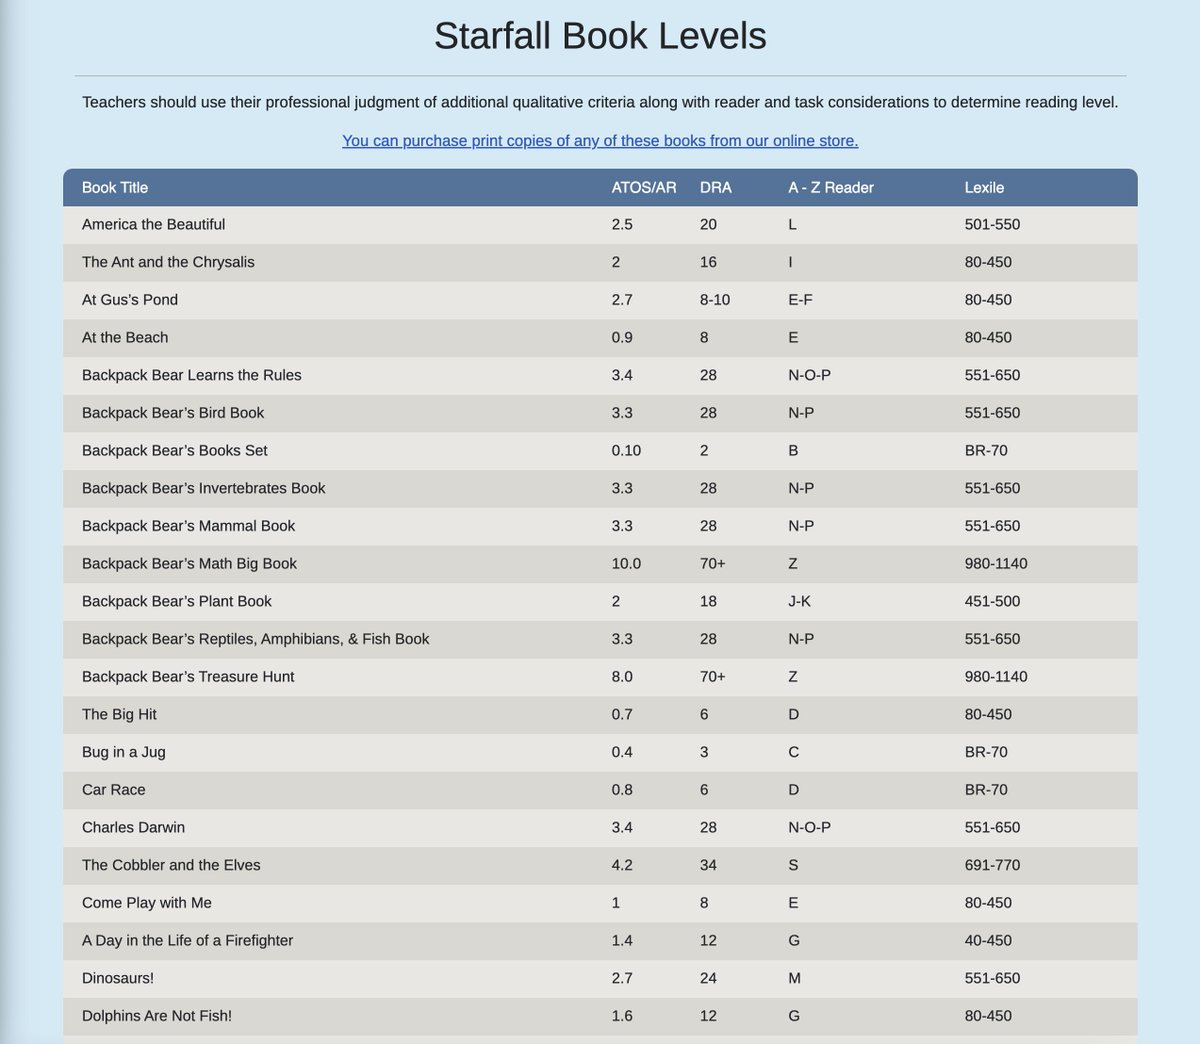 Searching for books by reading level?
teach.starfall.com/book-levels

#education #earlyreaders #homeschool